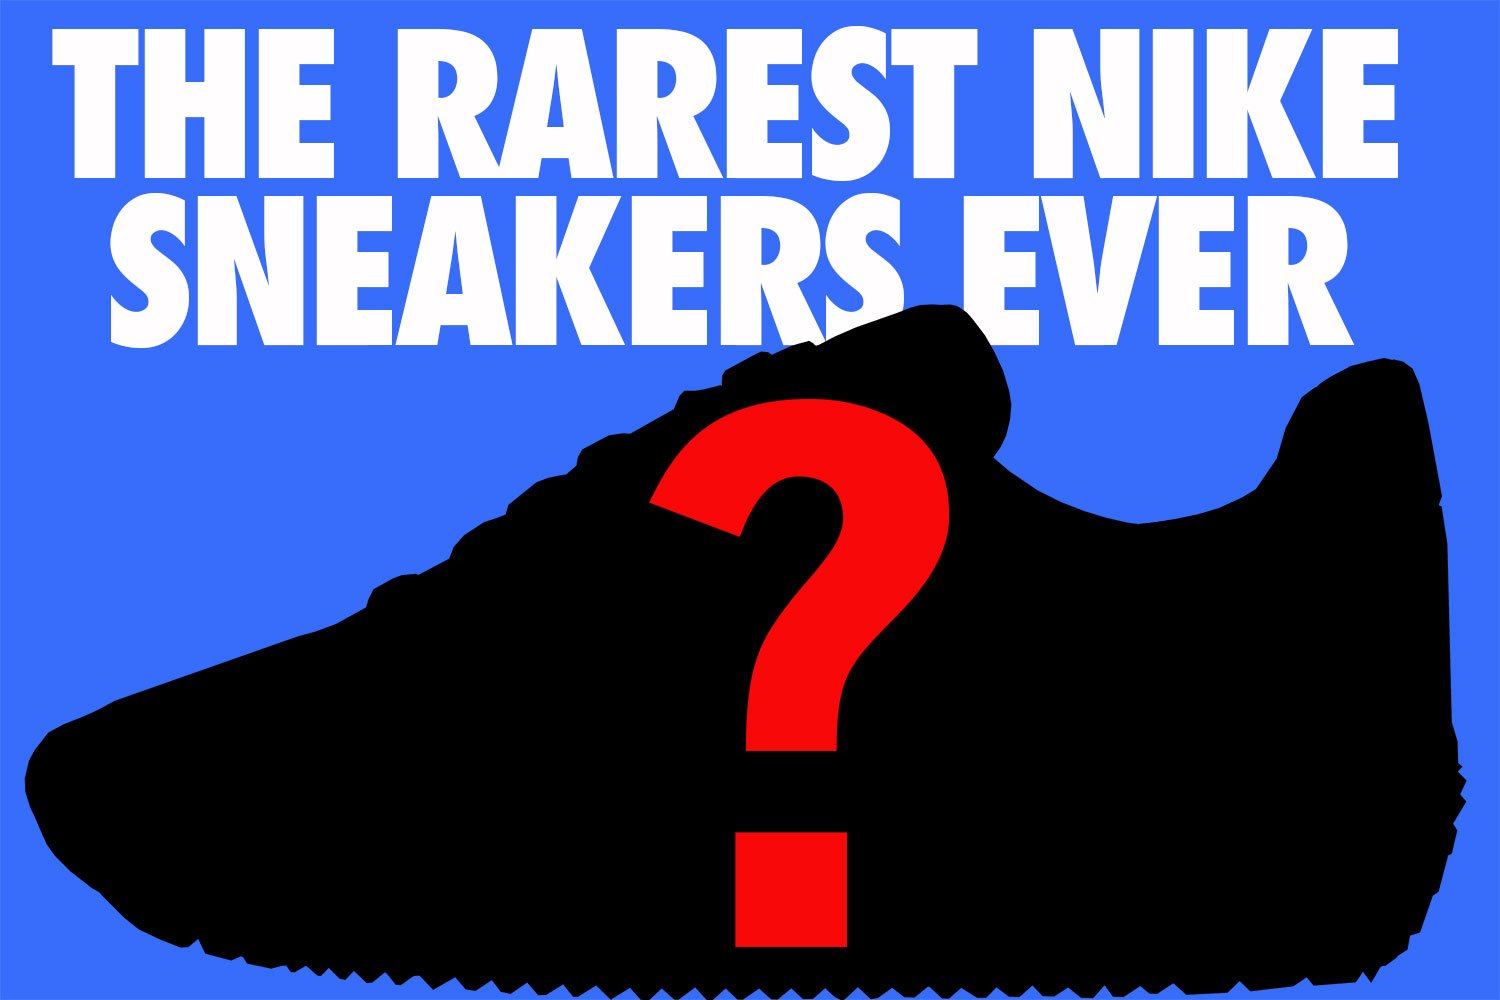 The Rarest Nike Sneakers Ever?